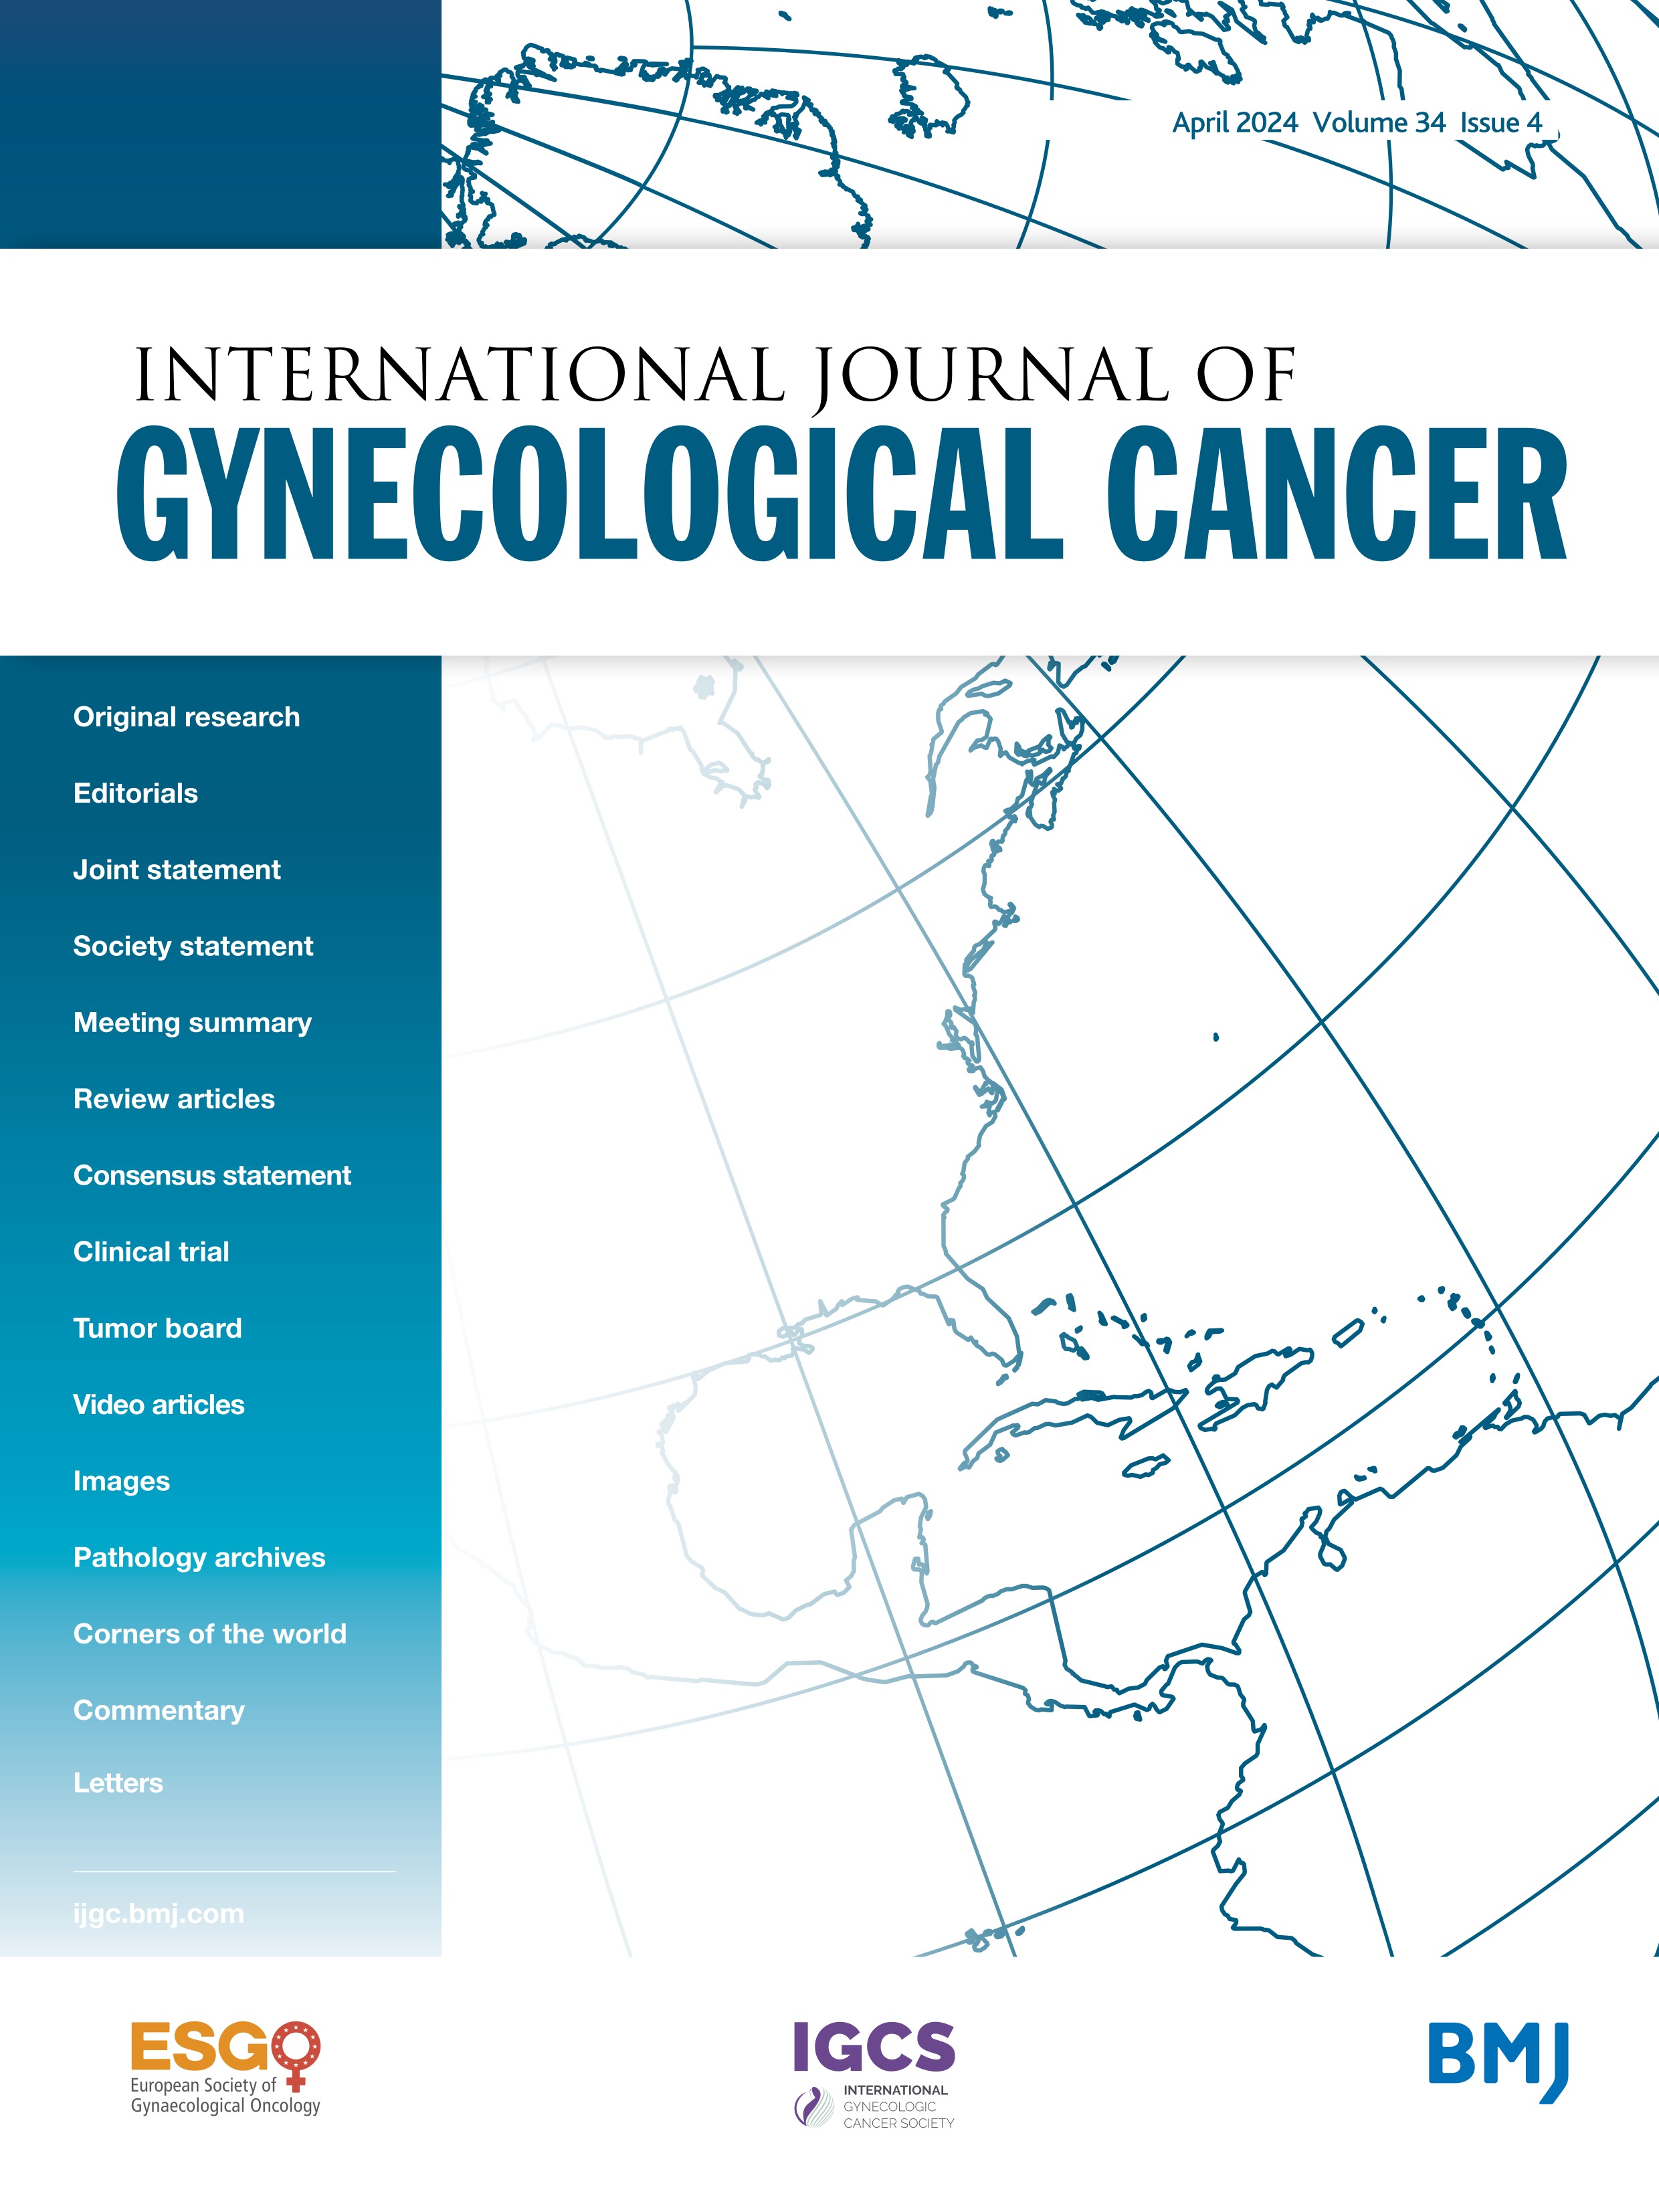 European Society of Gynaecological Oncology expanded quality indicators and accreditation for cervical cancer management